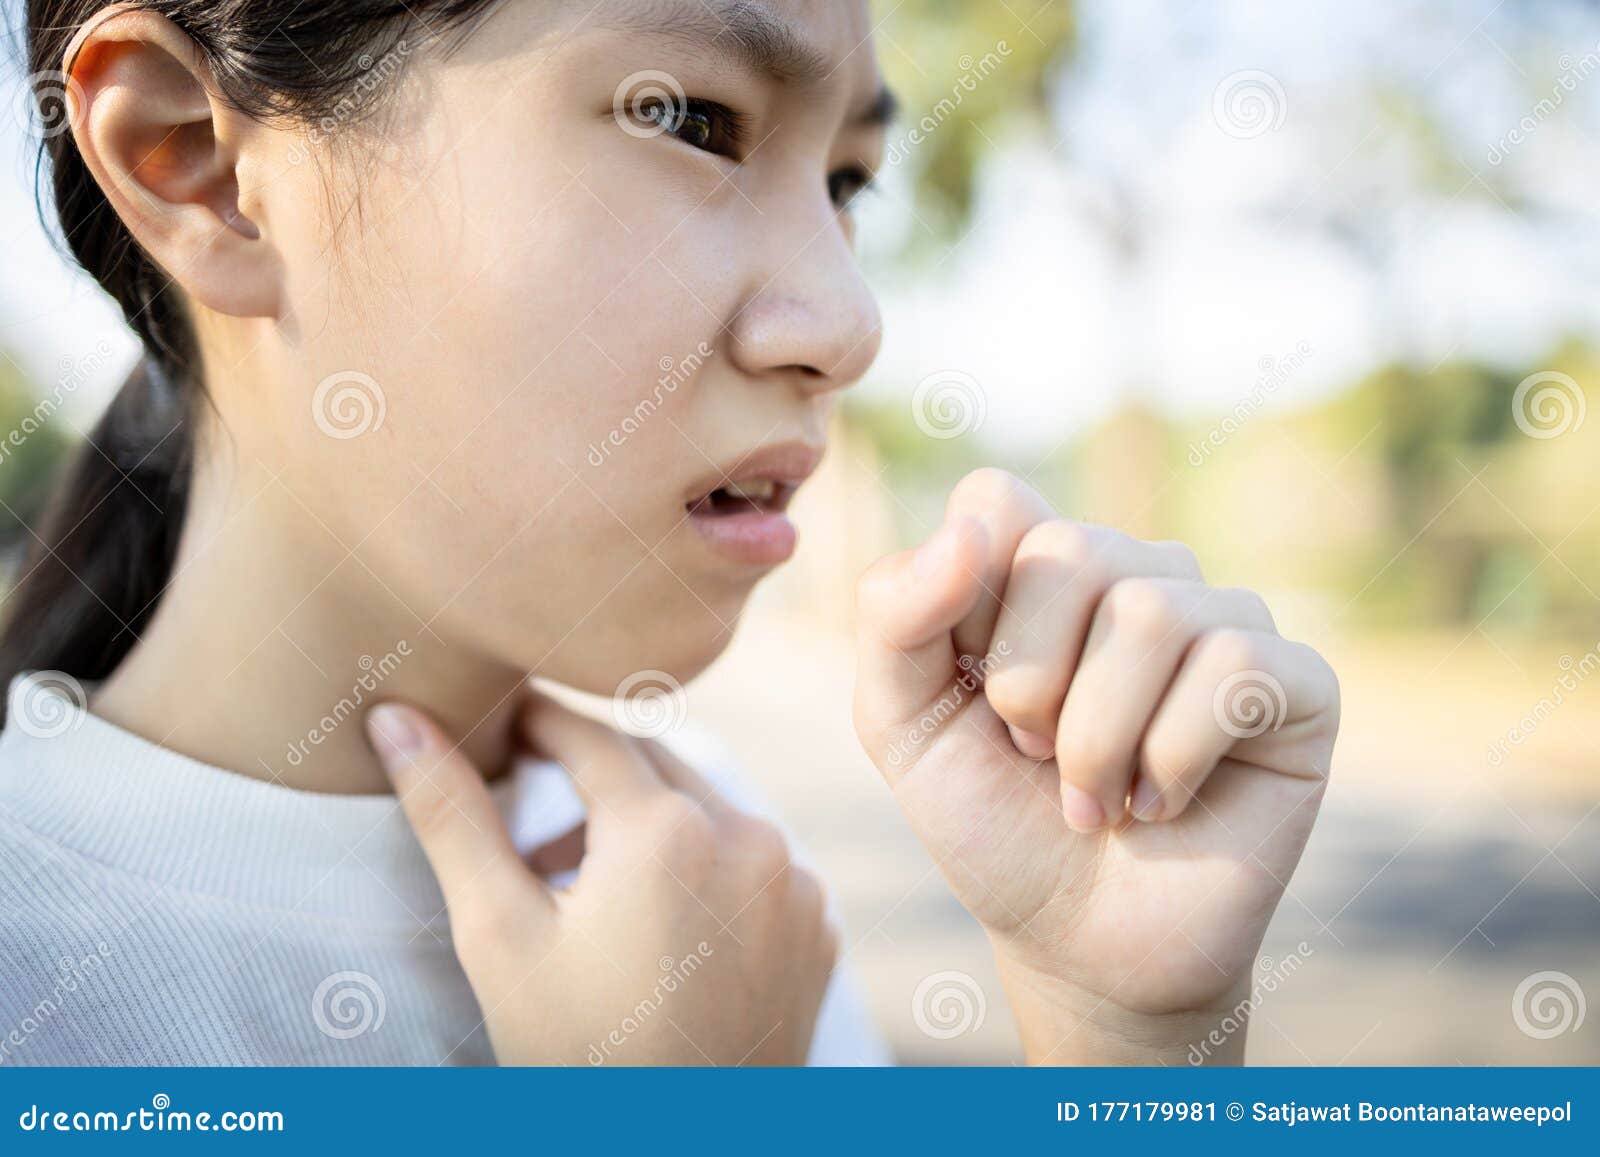 sick asian woman has a chronic cough with tonsillitis,ill child girl touch the neck with fever,acute cough,sore throat pain